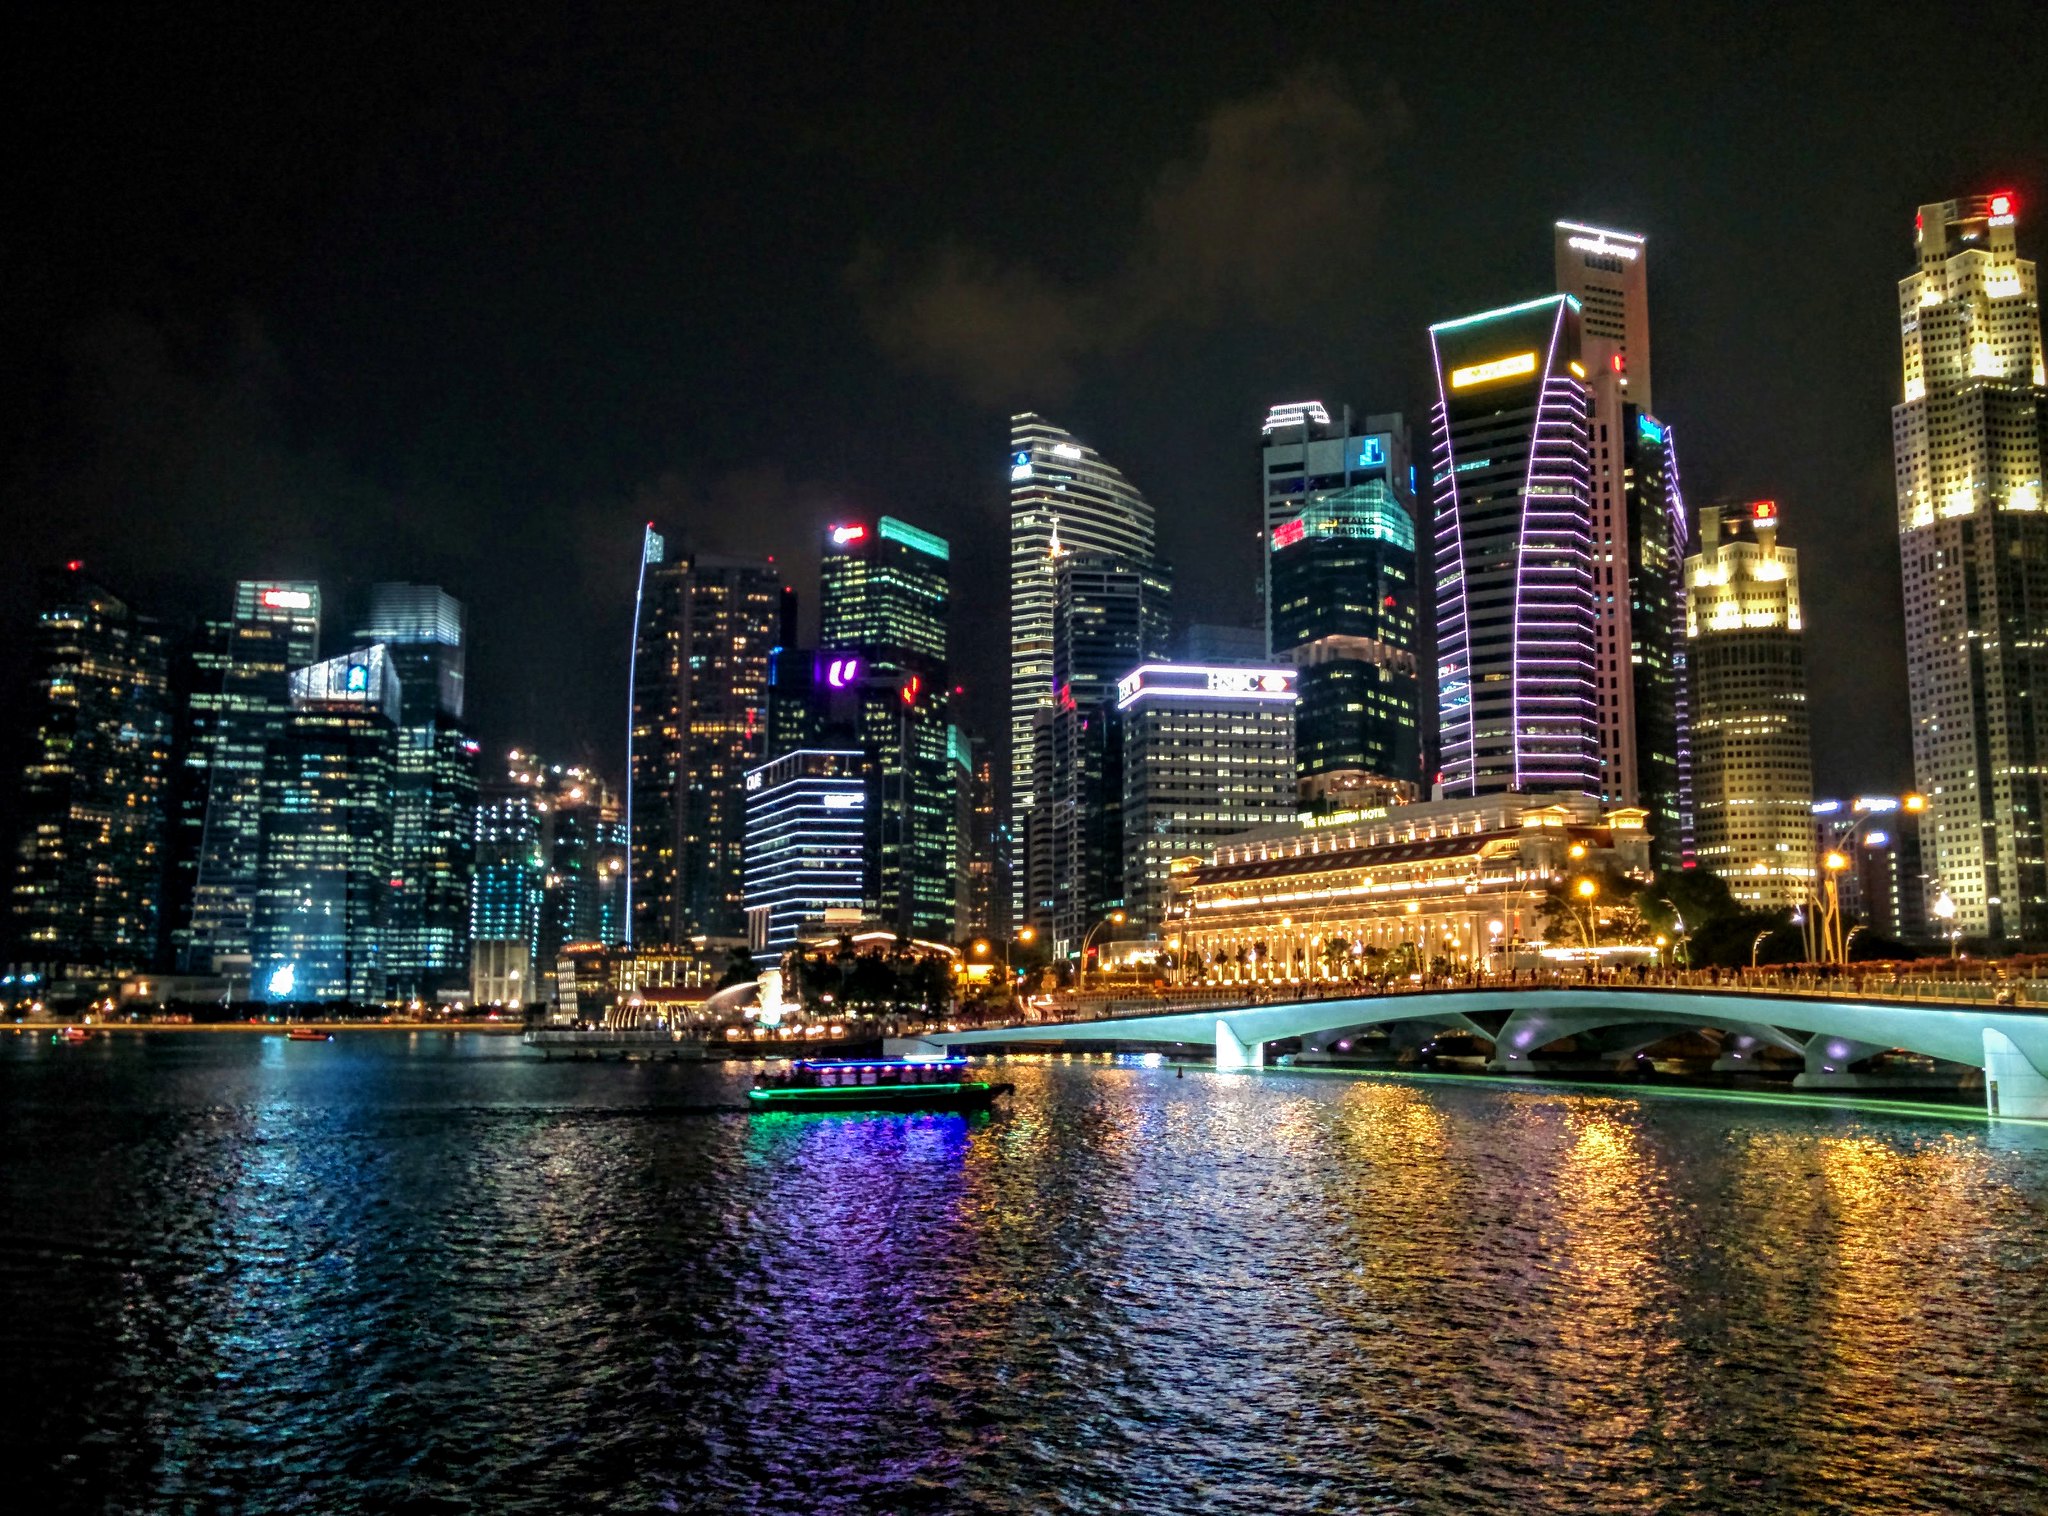 The colourful Singapore skyline at night